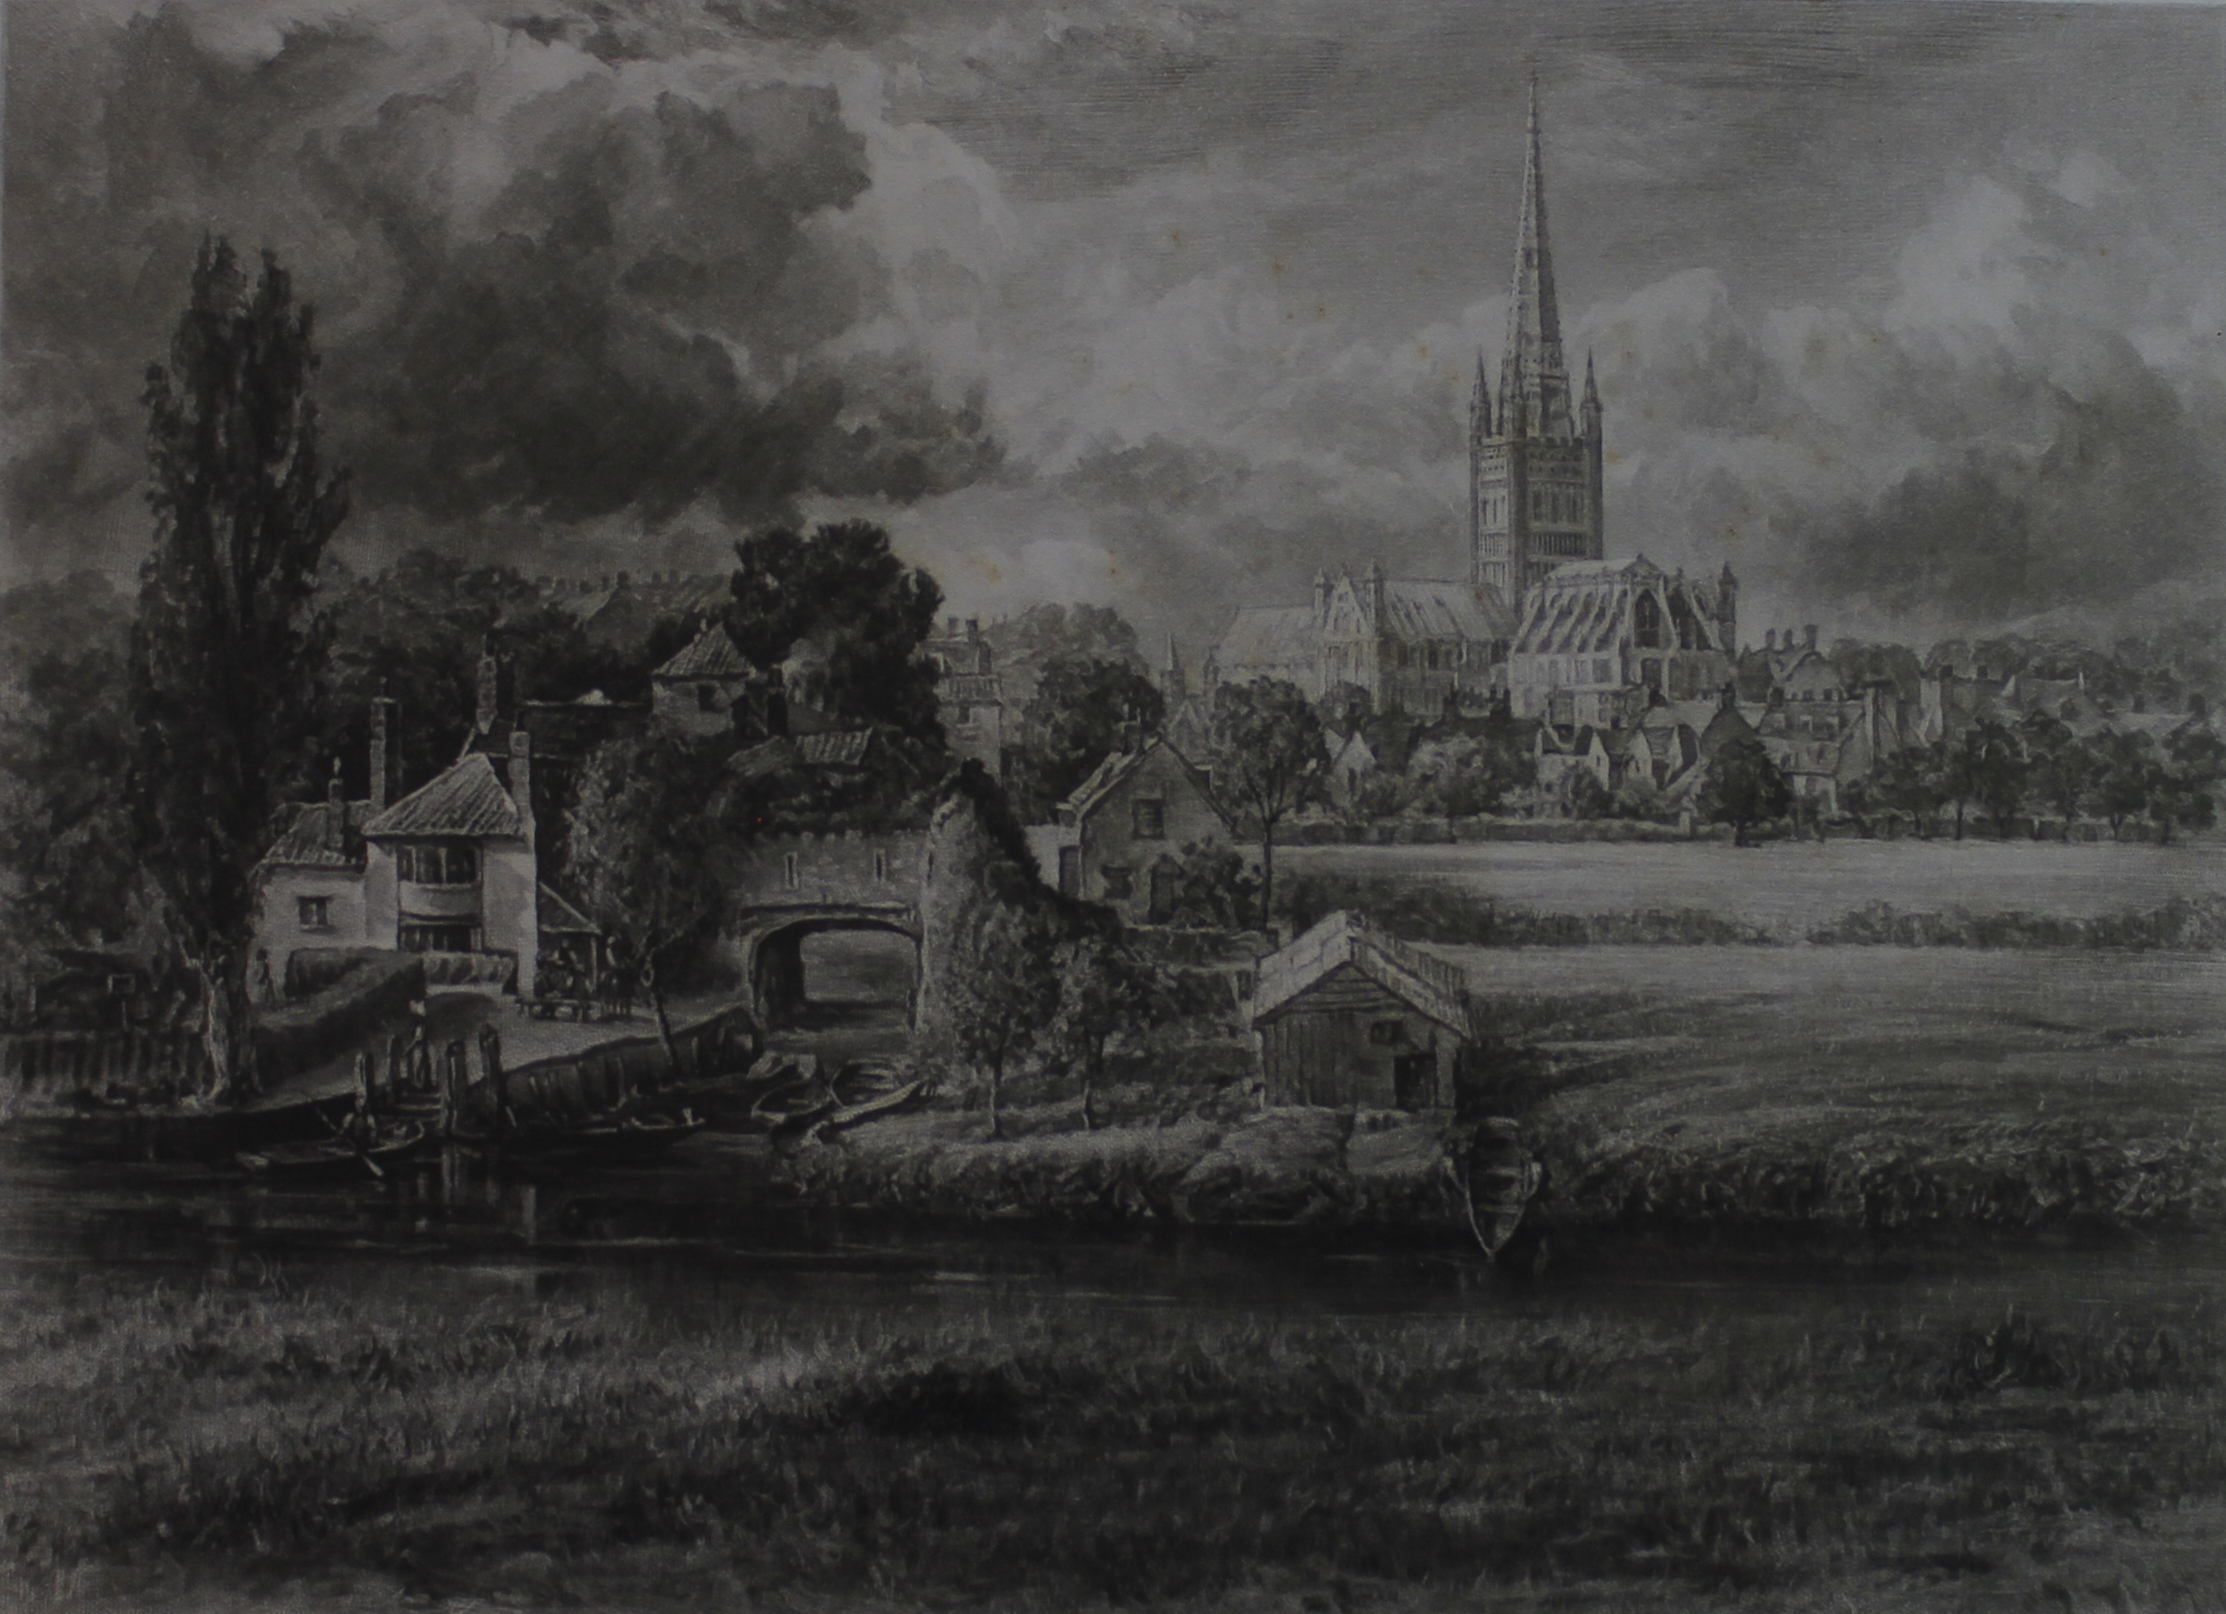 Norman Hirst, (20th Century, British, engraver), "Norwich, looking towards Pull's Ferry, with